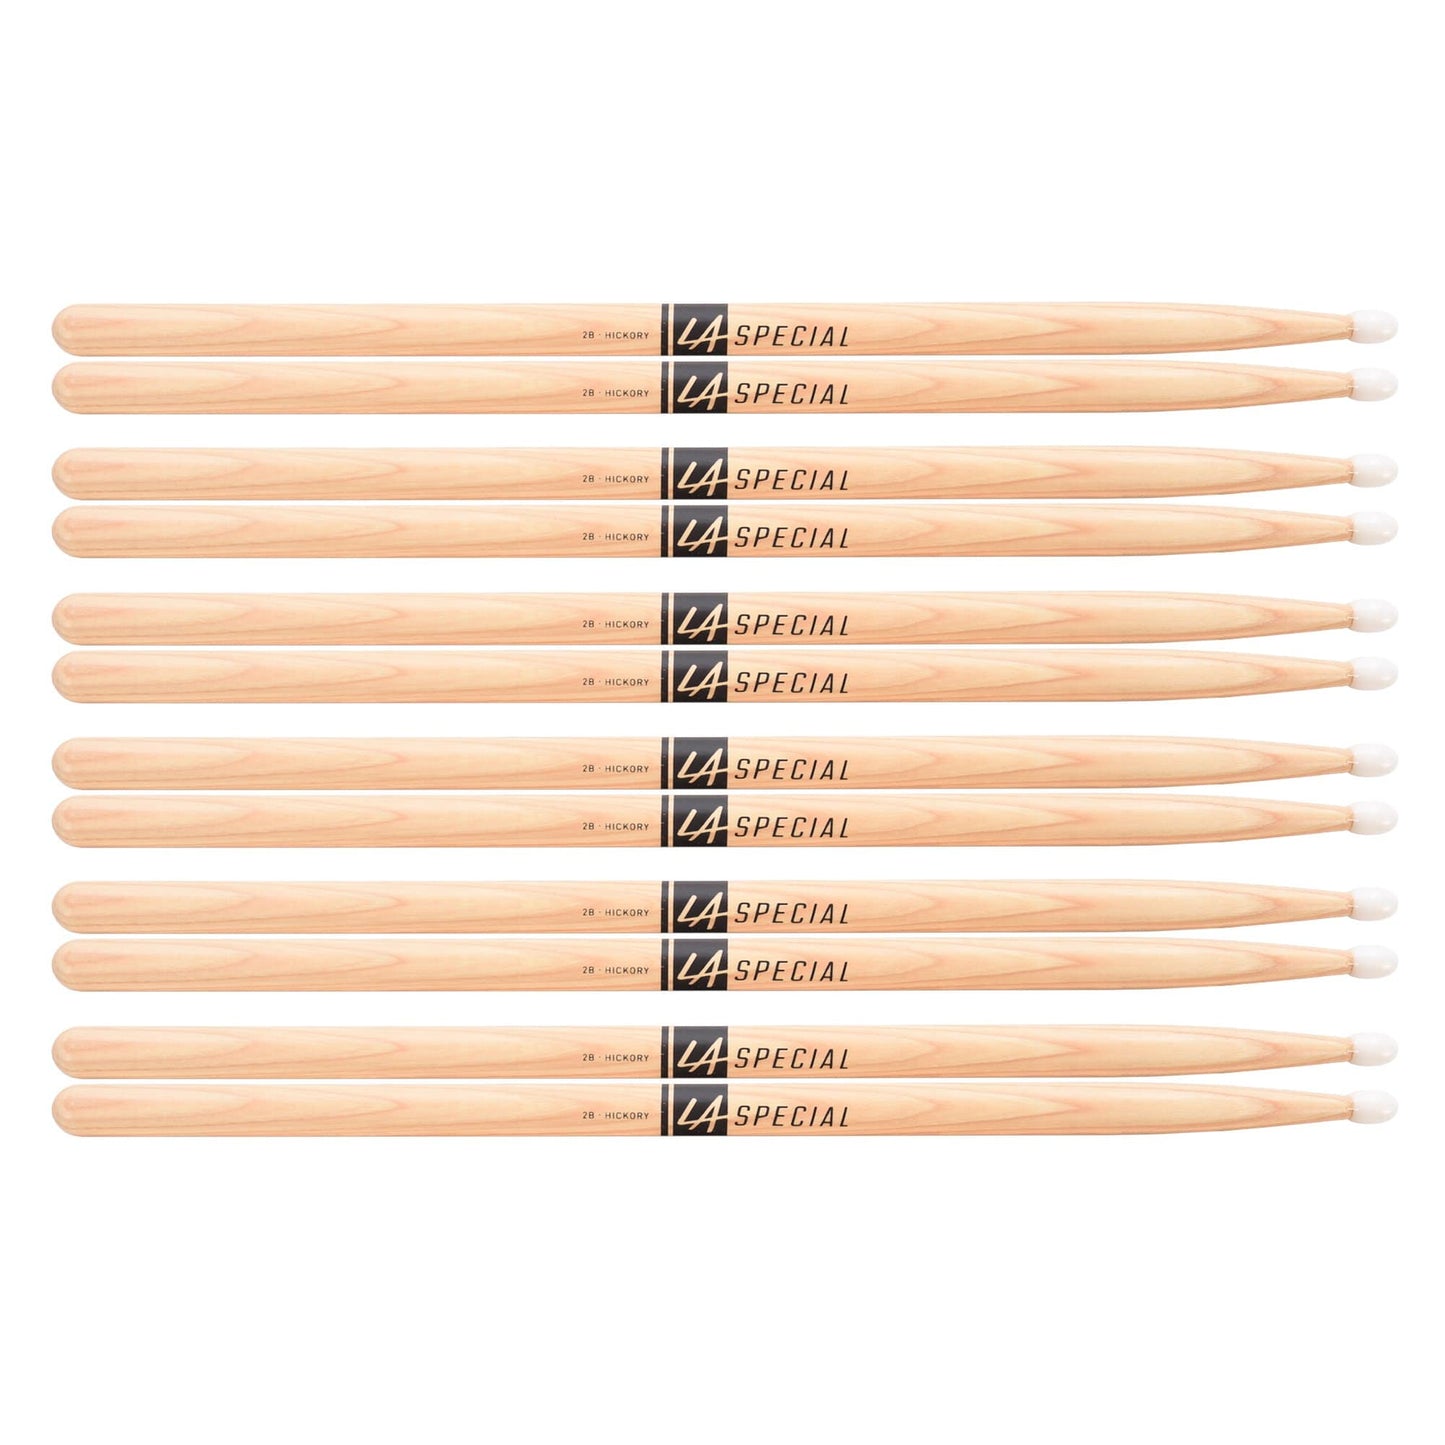 Promark LA Special 2B Nylon Tip Drum Sticks (6 Pair Bundle) Drums and Percussion / Parts and Accessories / Drum Sticks and Mallets